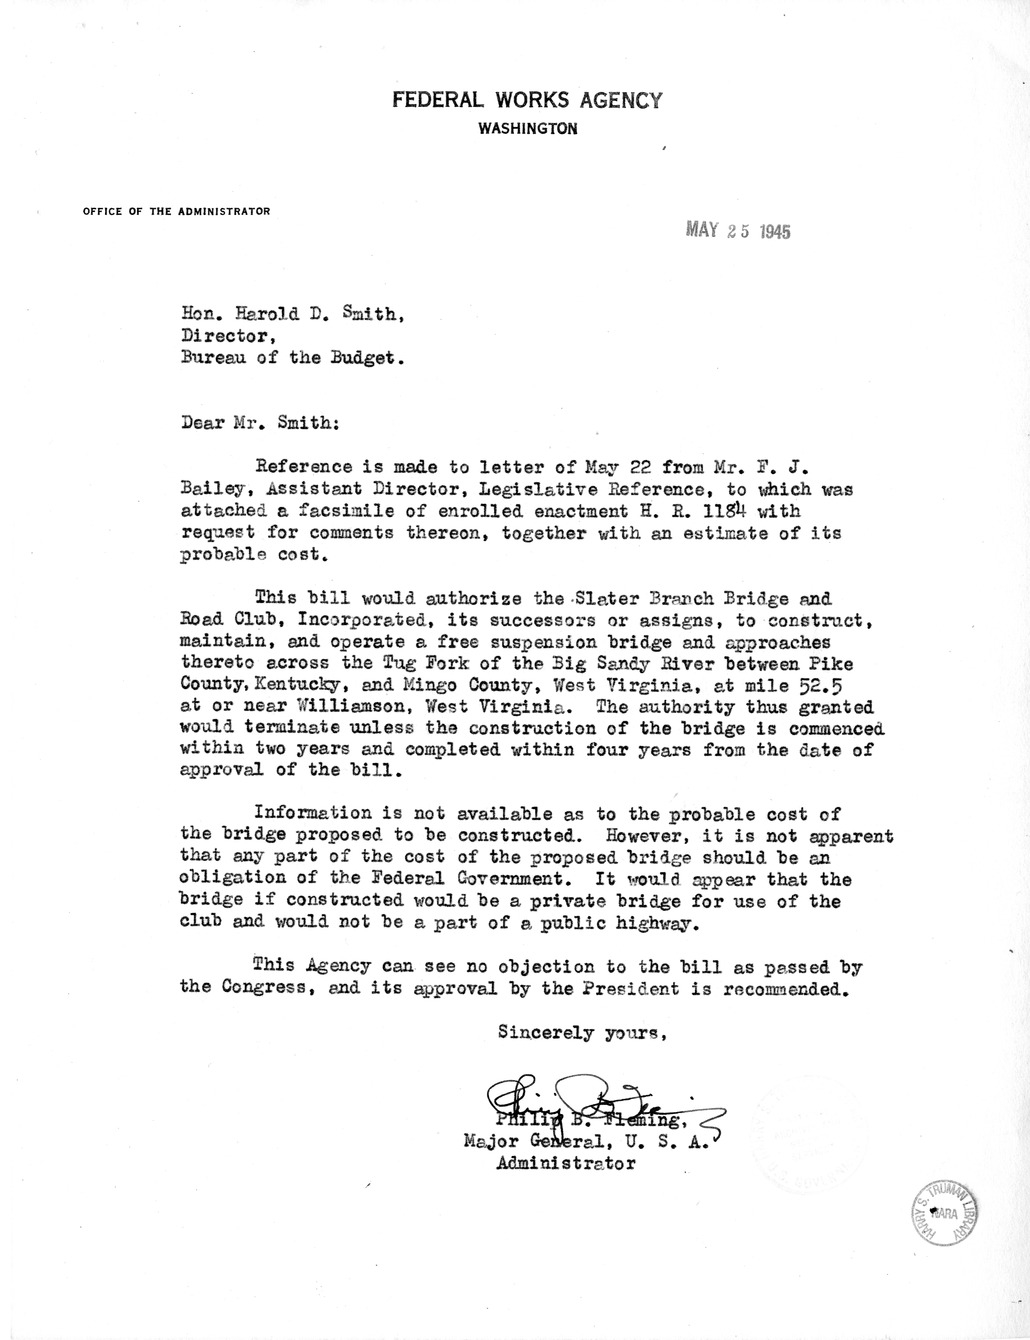 Memorandum from Frederick J. Bailey to M. C. Latta, H.R. 1184, To Authorize Slater Branch Bridge and Road Club to Construct, Maintain, and Operate a Free Suspension Bridge Across the Tug Fork of the Big Sandy River Near Williamson, West Virginia, with Att